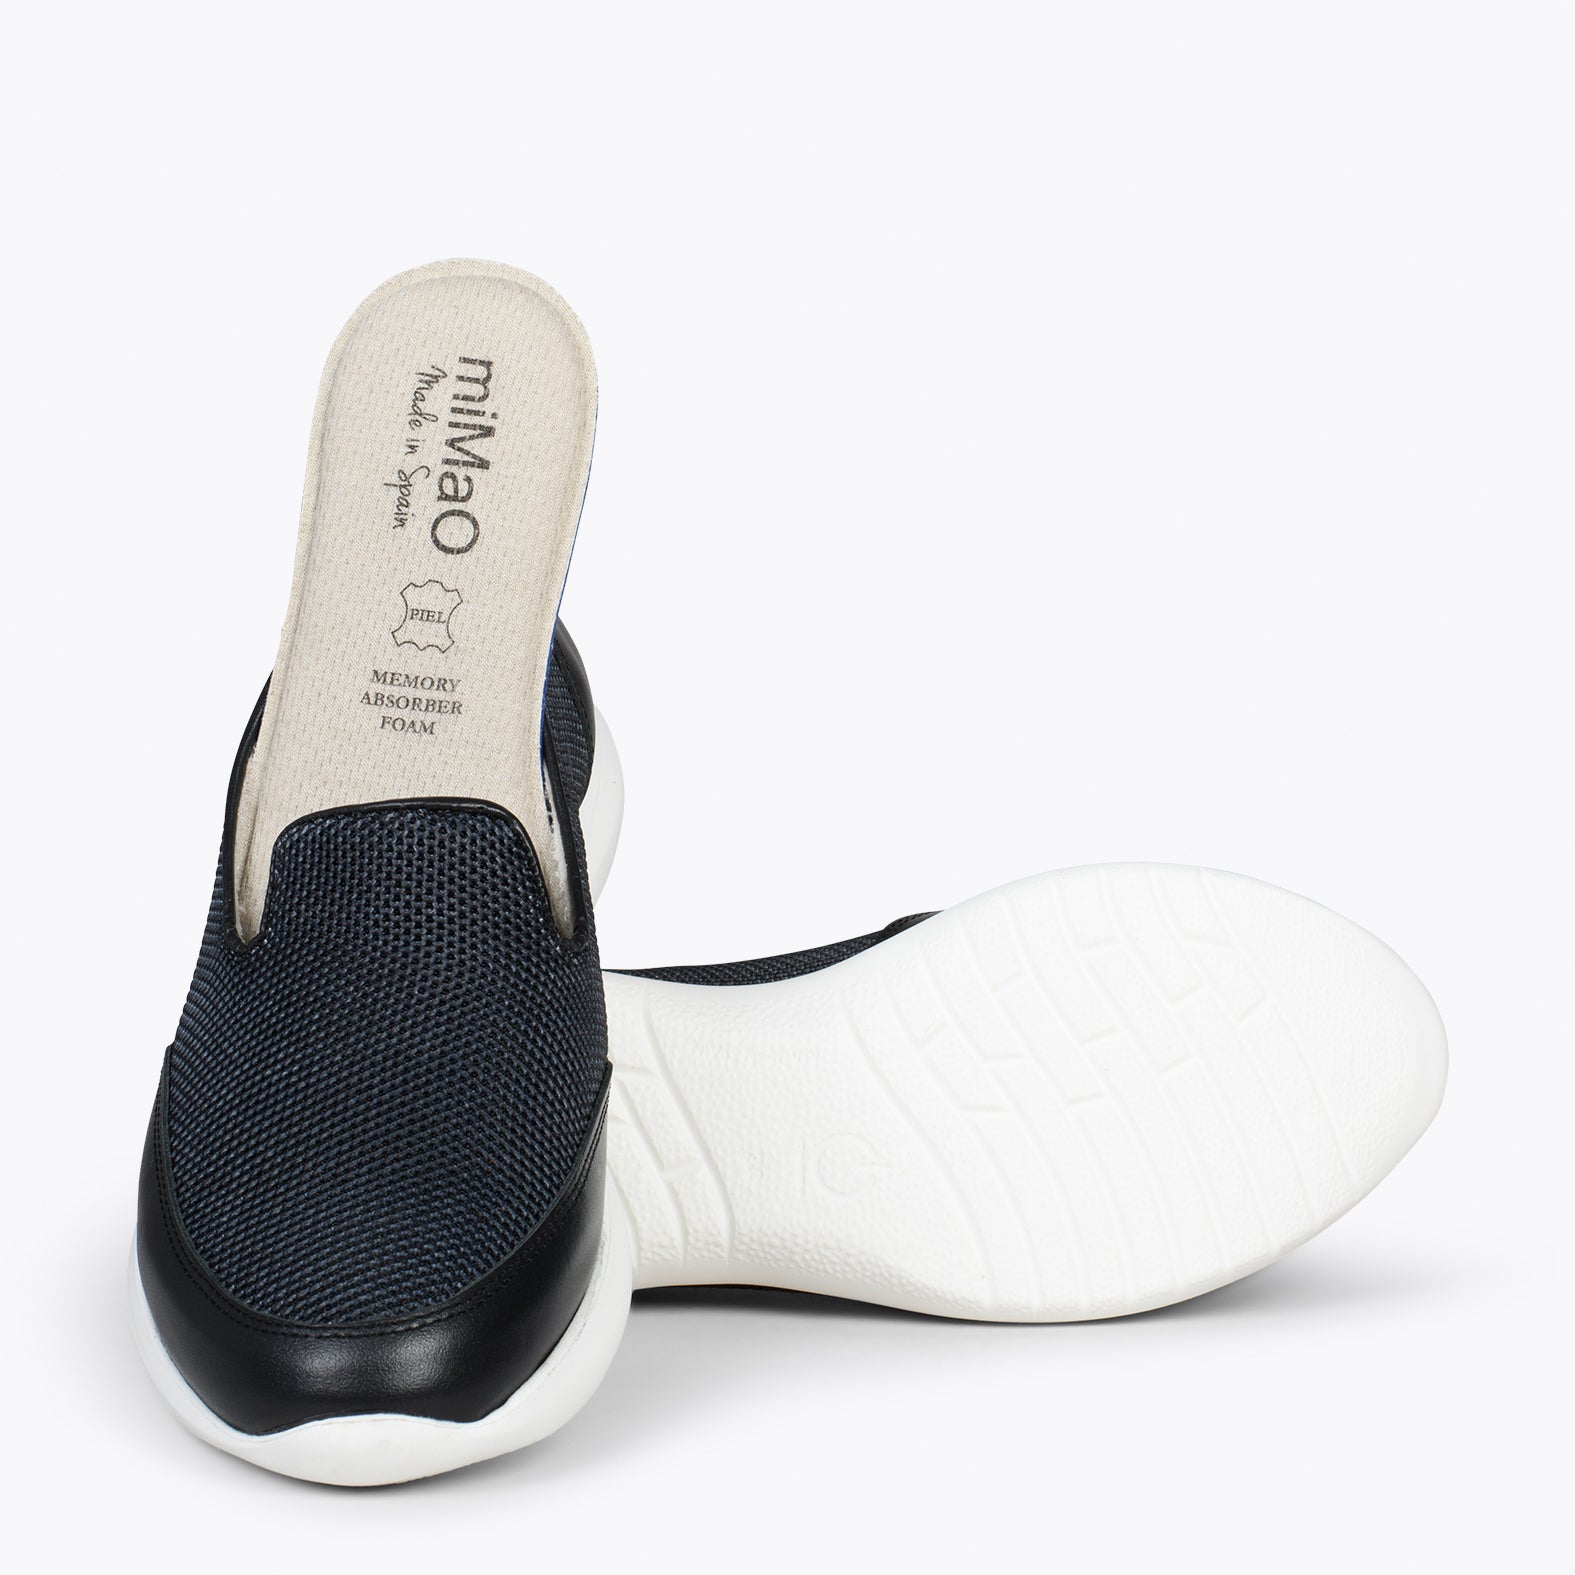 SLIPPER SPORT – BLACK sneakers with no laces and mesh design